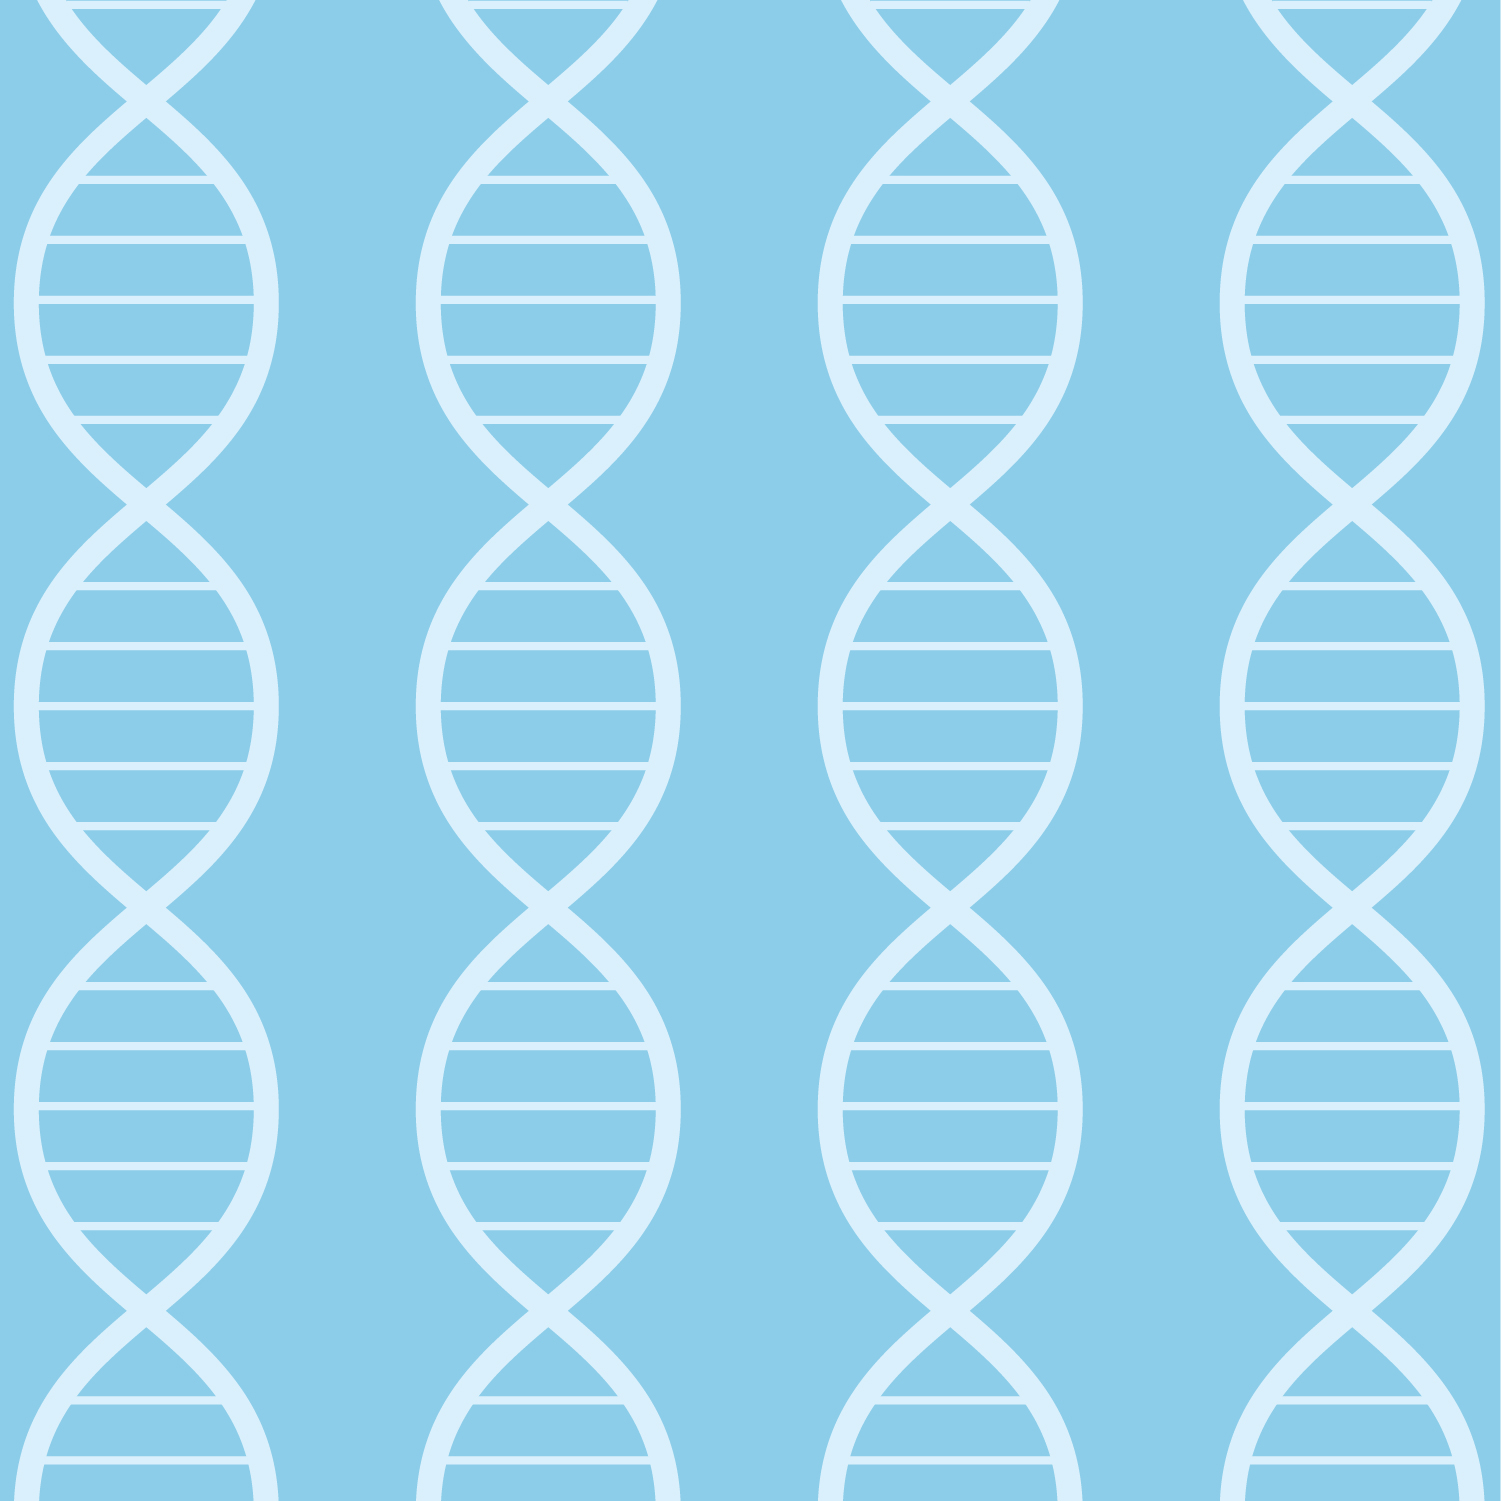 Simple DNA drawing in white with a light blue background.